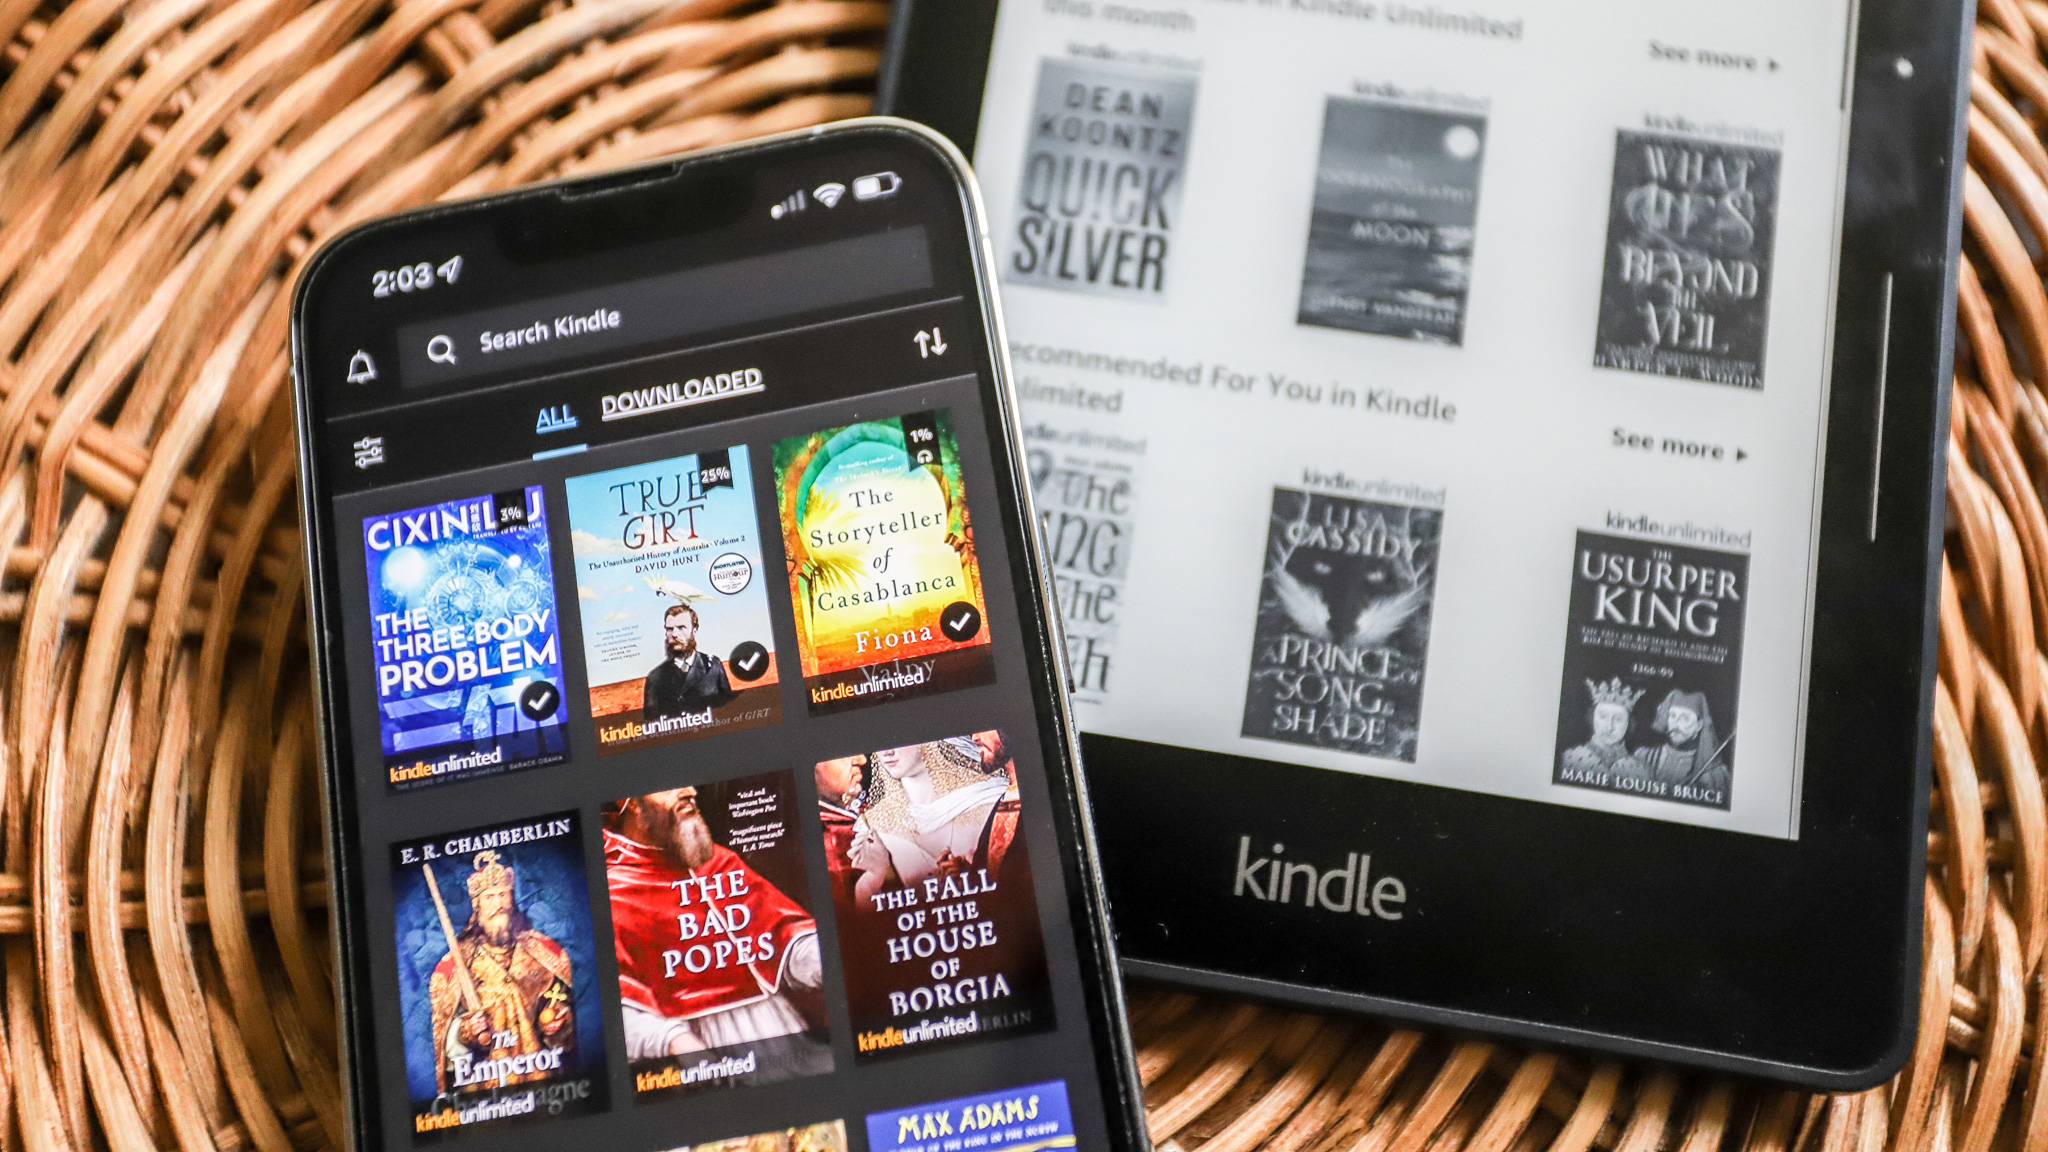 kindle ebooks in kindle store to purchase